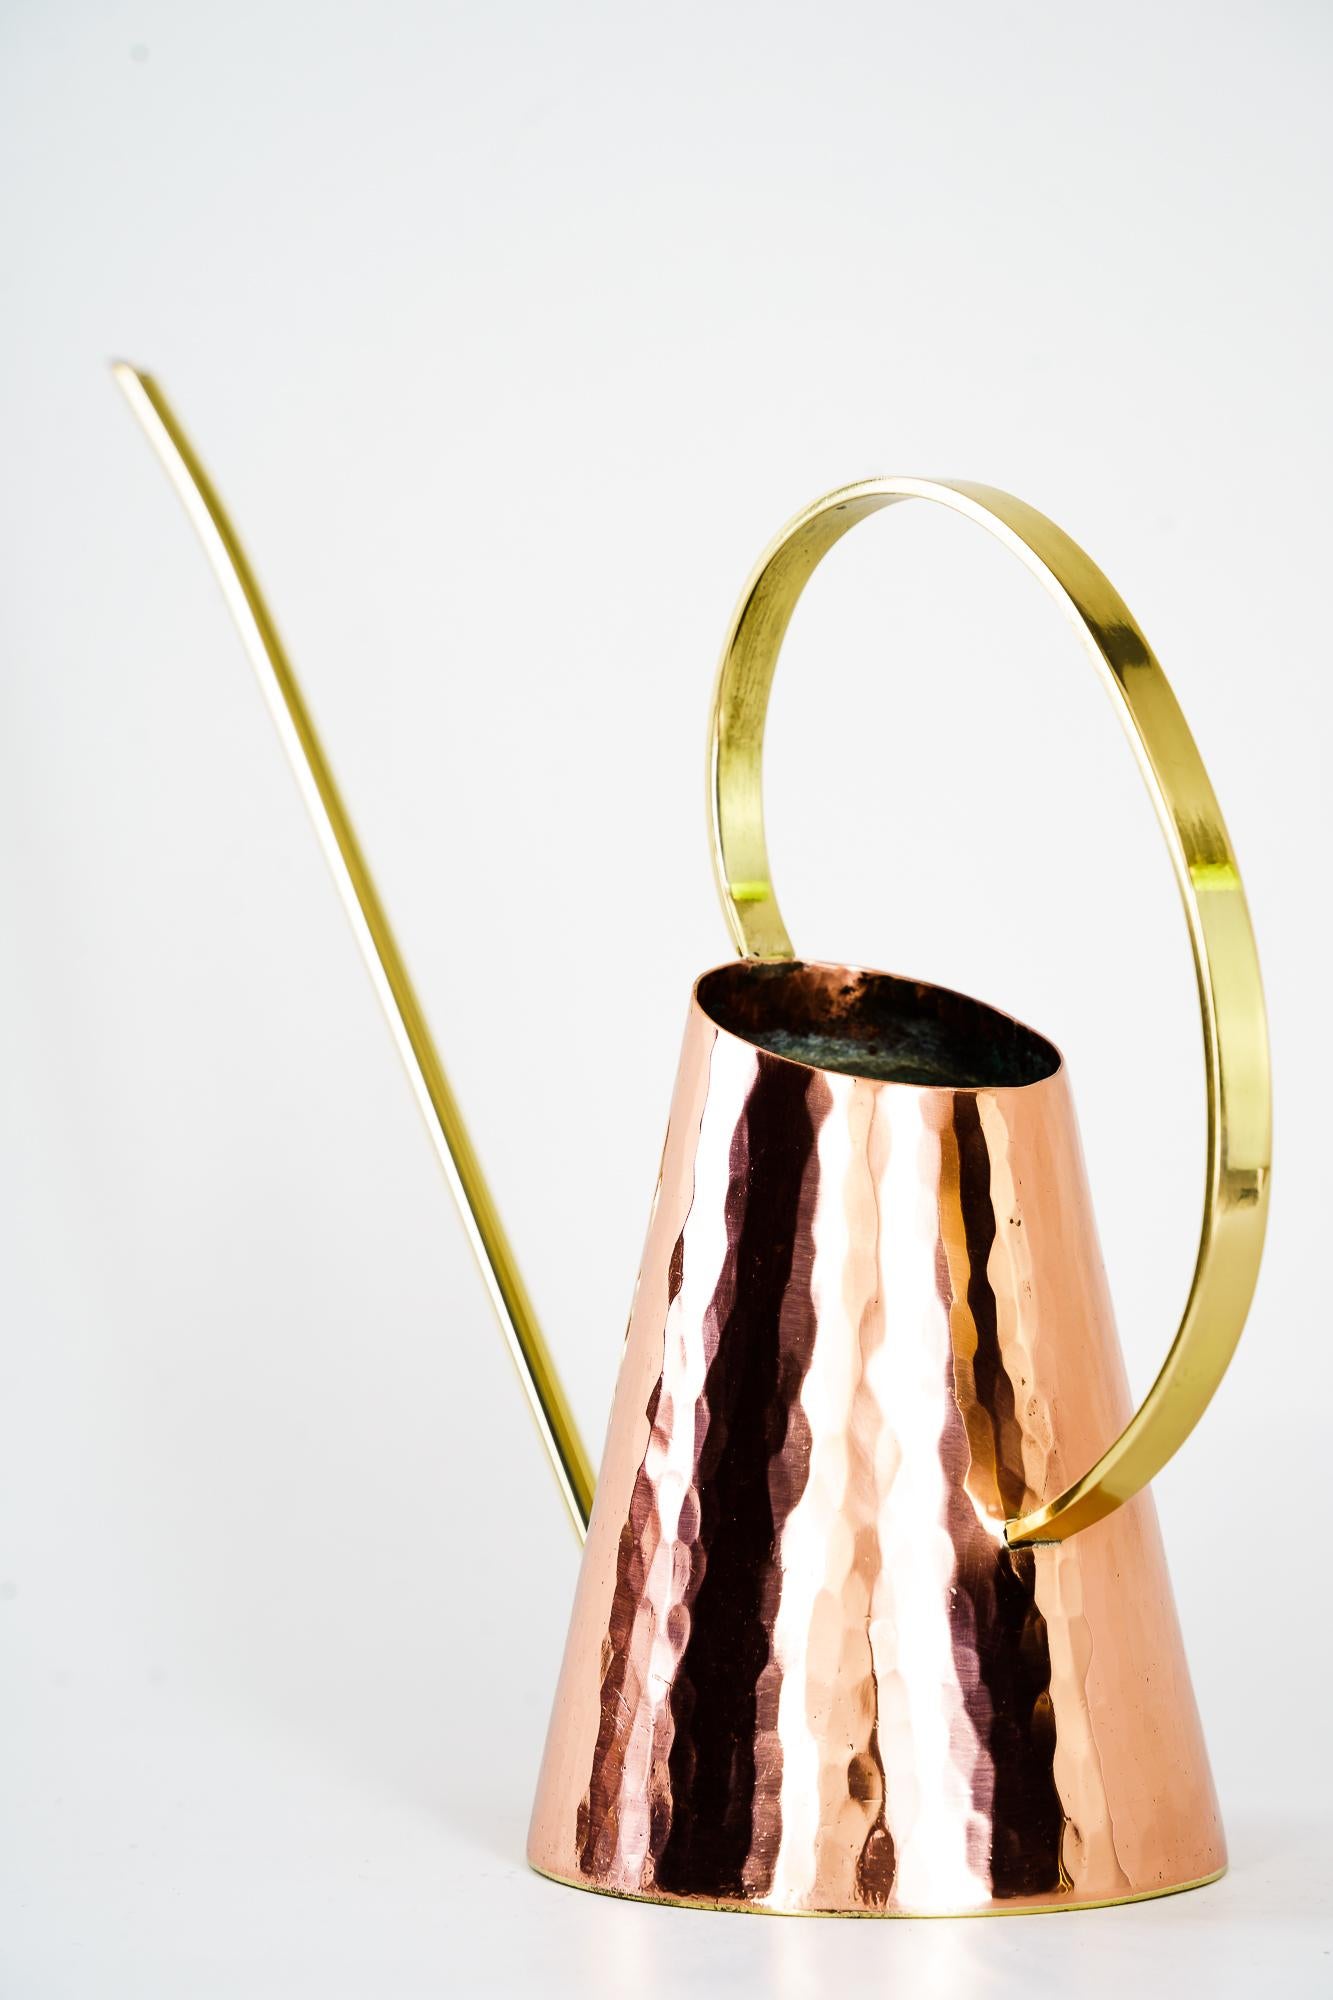 Hammered Watering Can, circa 1950s
Copper and brass combination
Polished and stove enamelled
Very nice design.